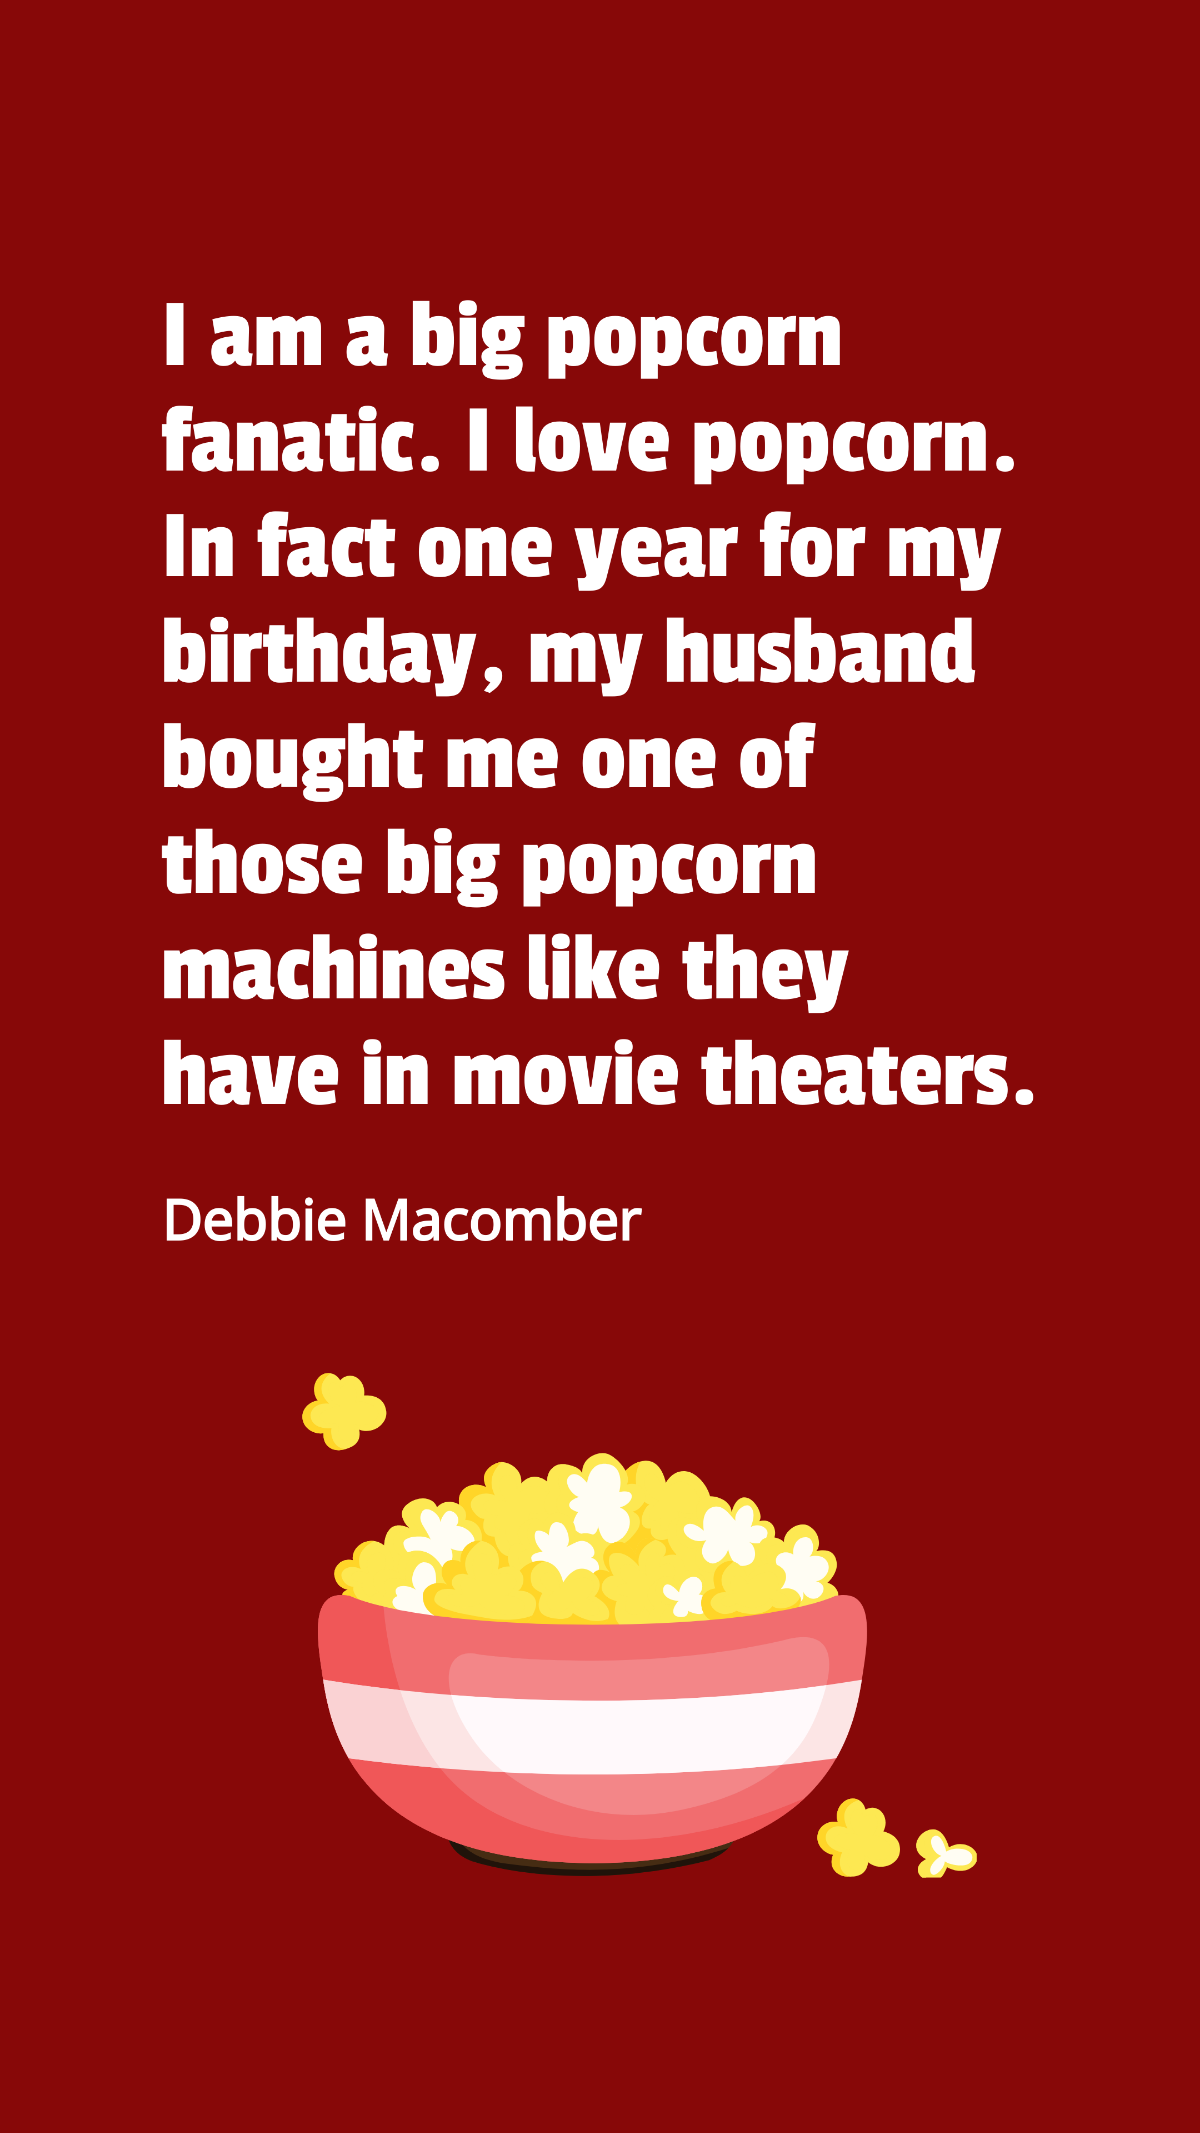 Debbie Macomber - I am a big popcorn fanatic. I love popcorn. In fact one year for my birthday, my husband bought me one of those big popcorn machines like they have in movie theaters. Template